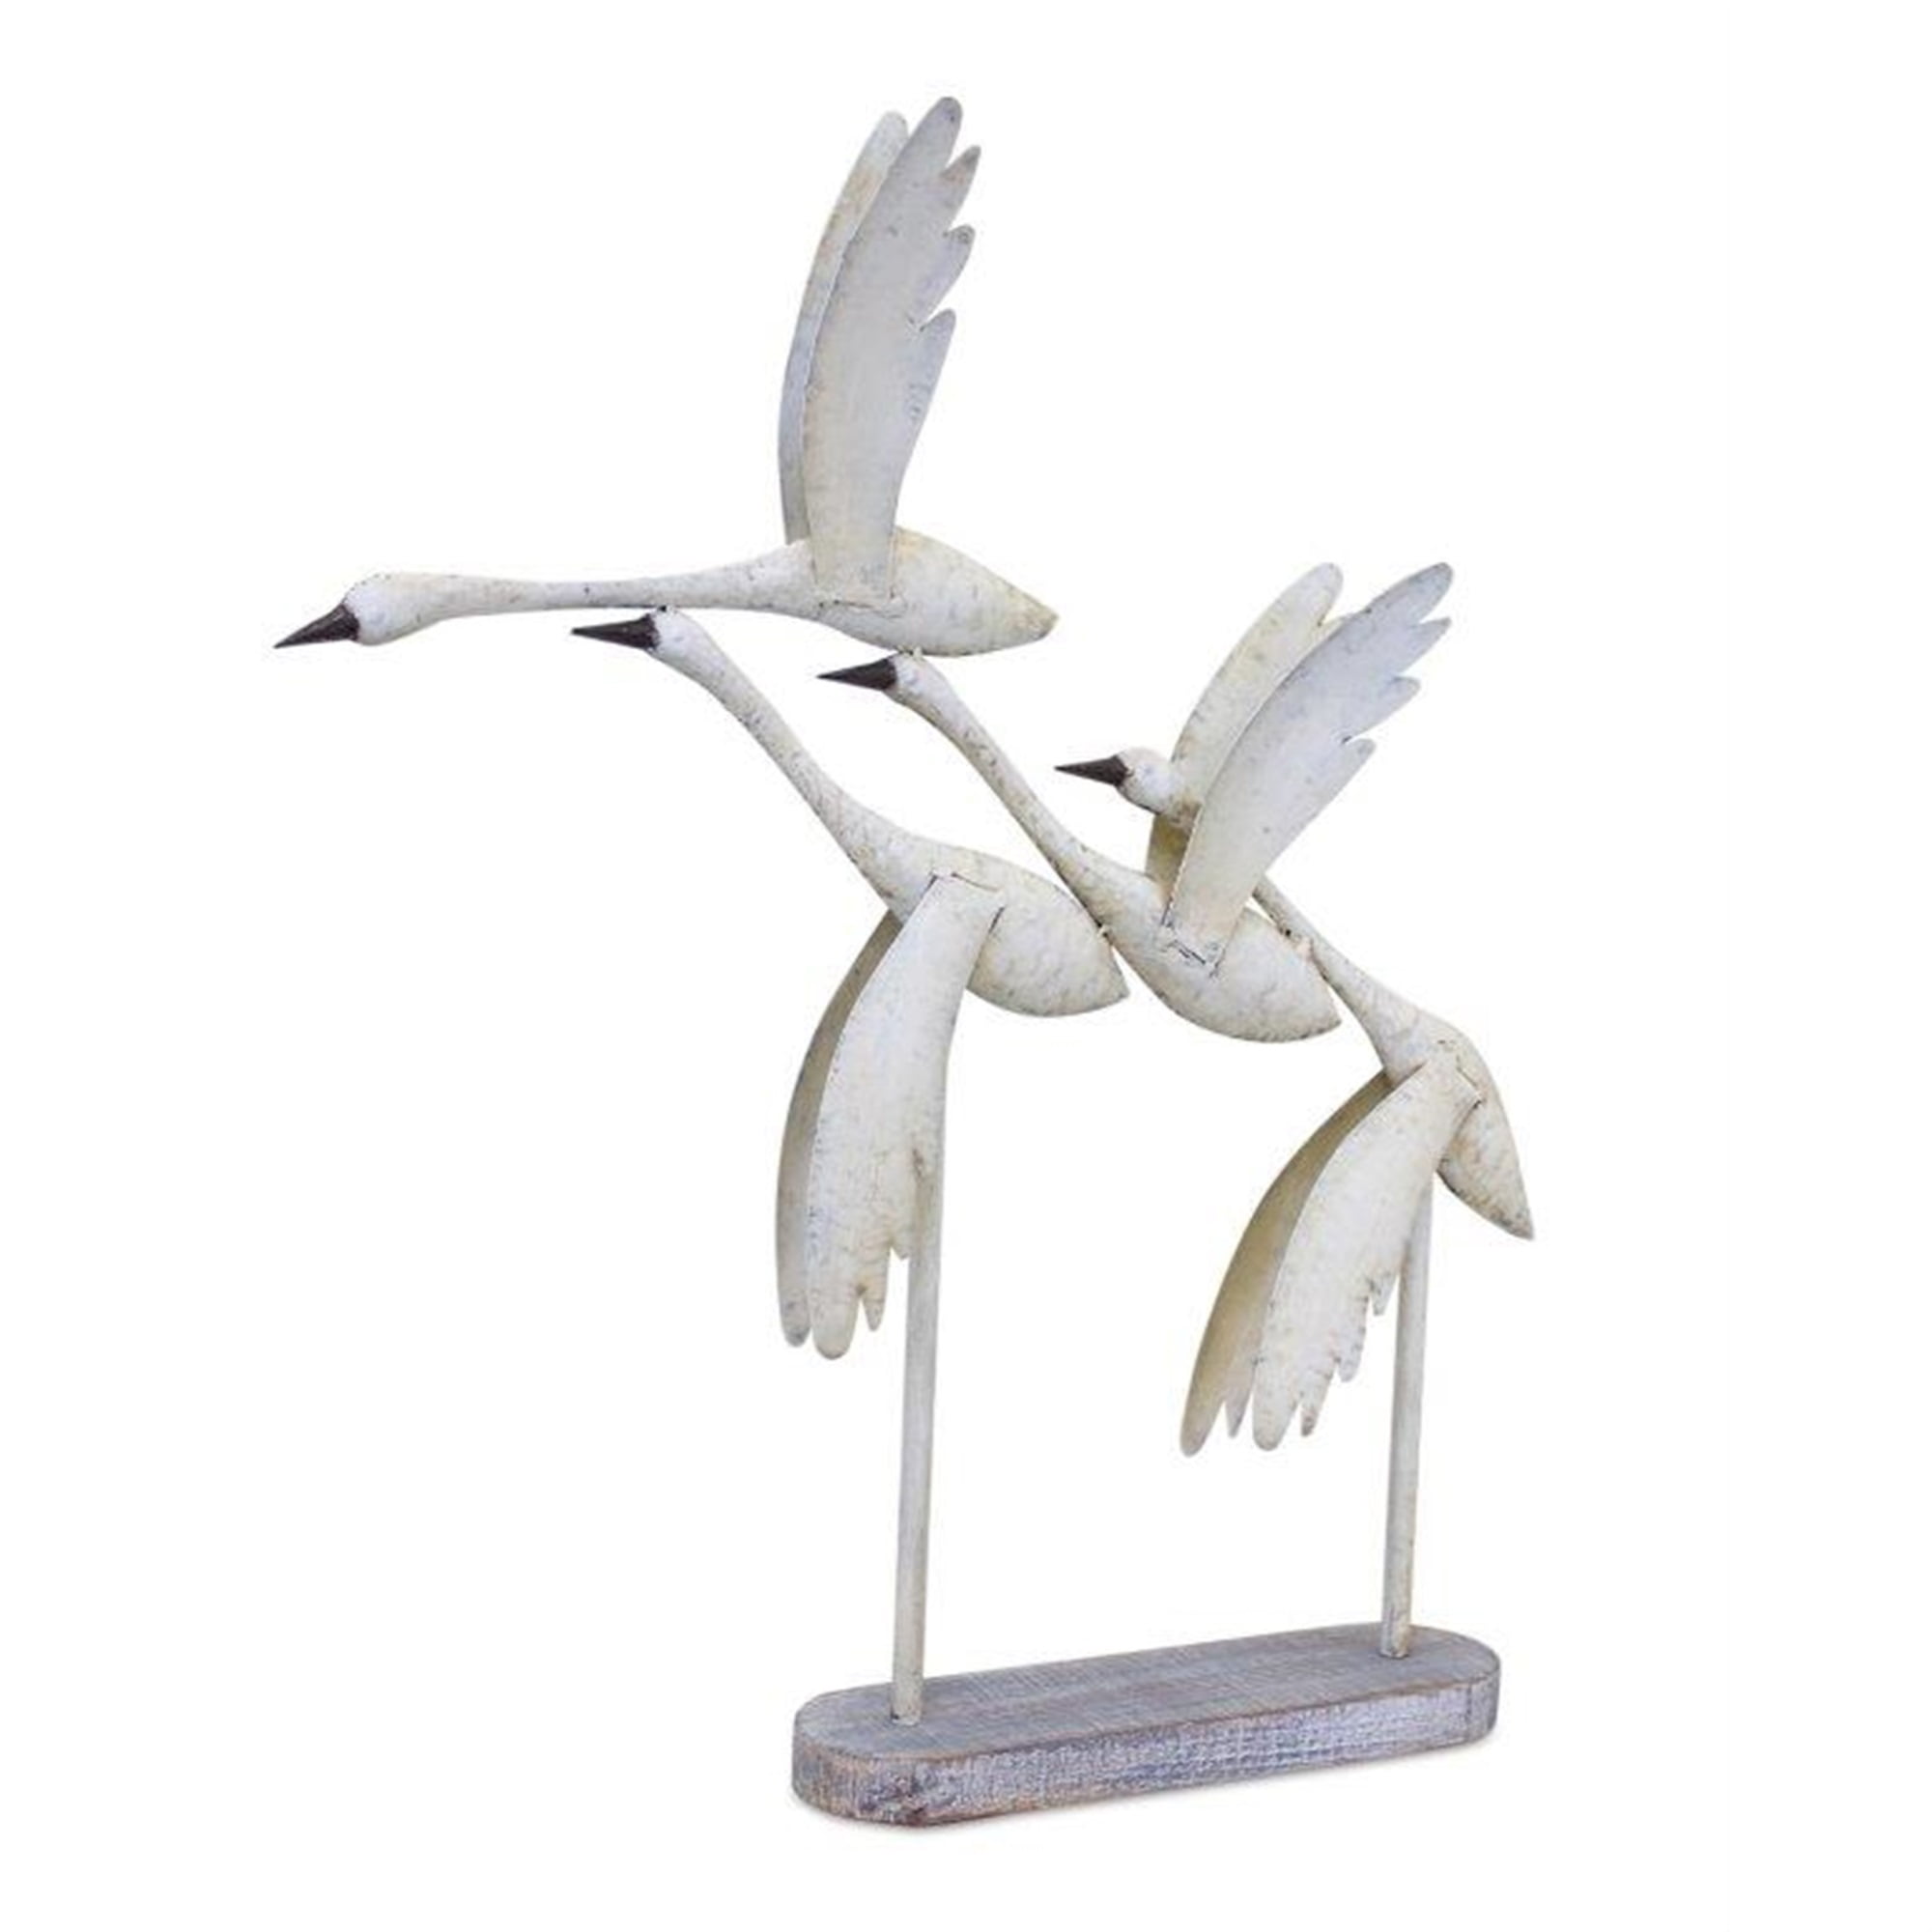 Flying Geese 24.5"L x 27.75"H Iron/Wood